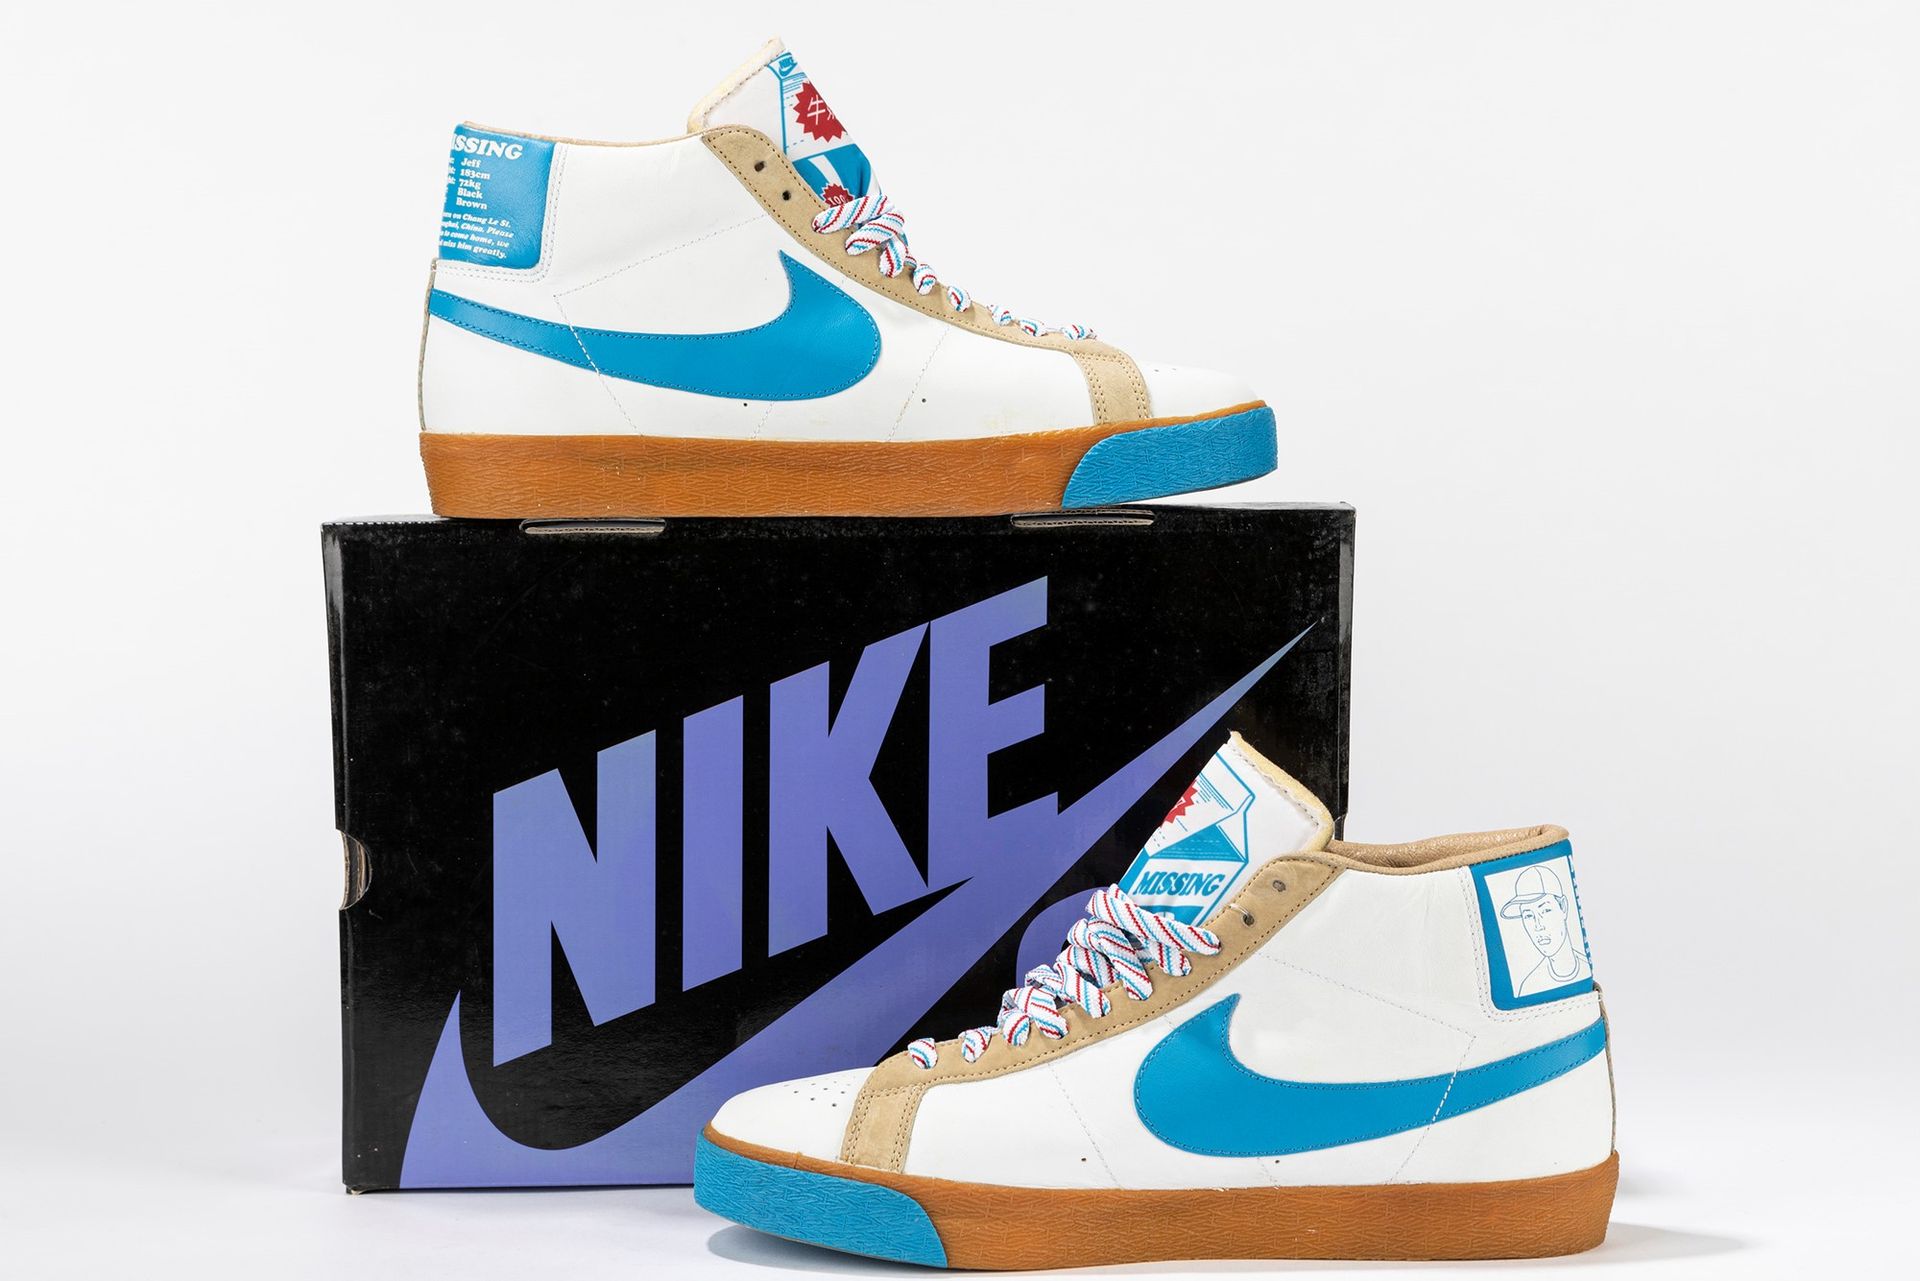 NIKE SB Blazer Milk Crate | Size US 10.5 EUR 44.5, 2007

Another chapter in Nike&hellip;